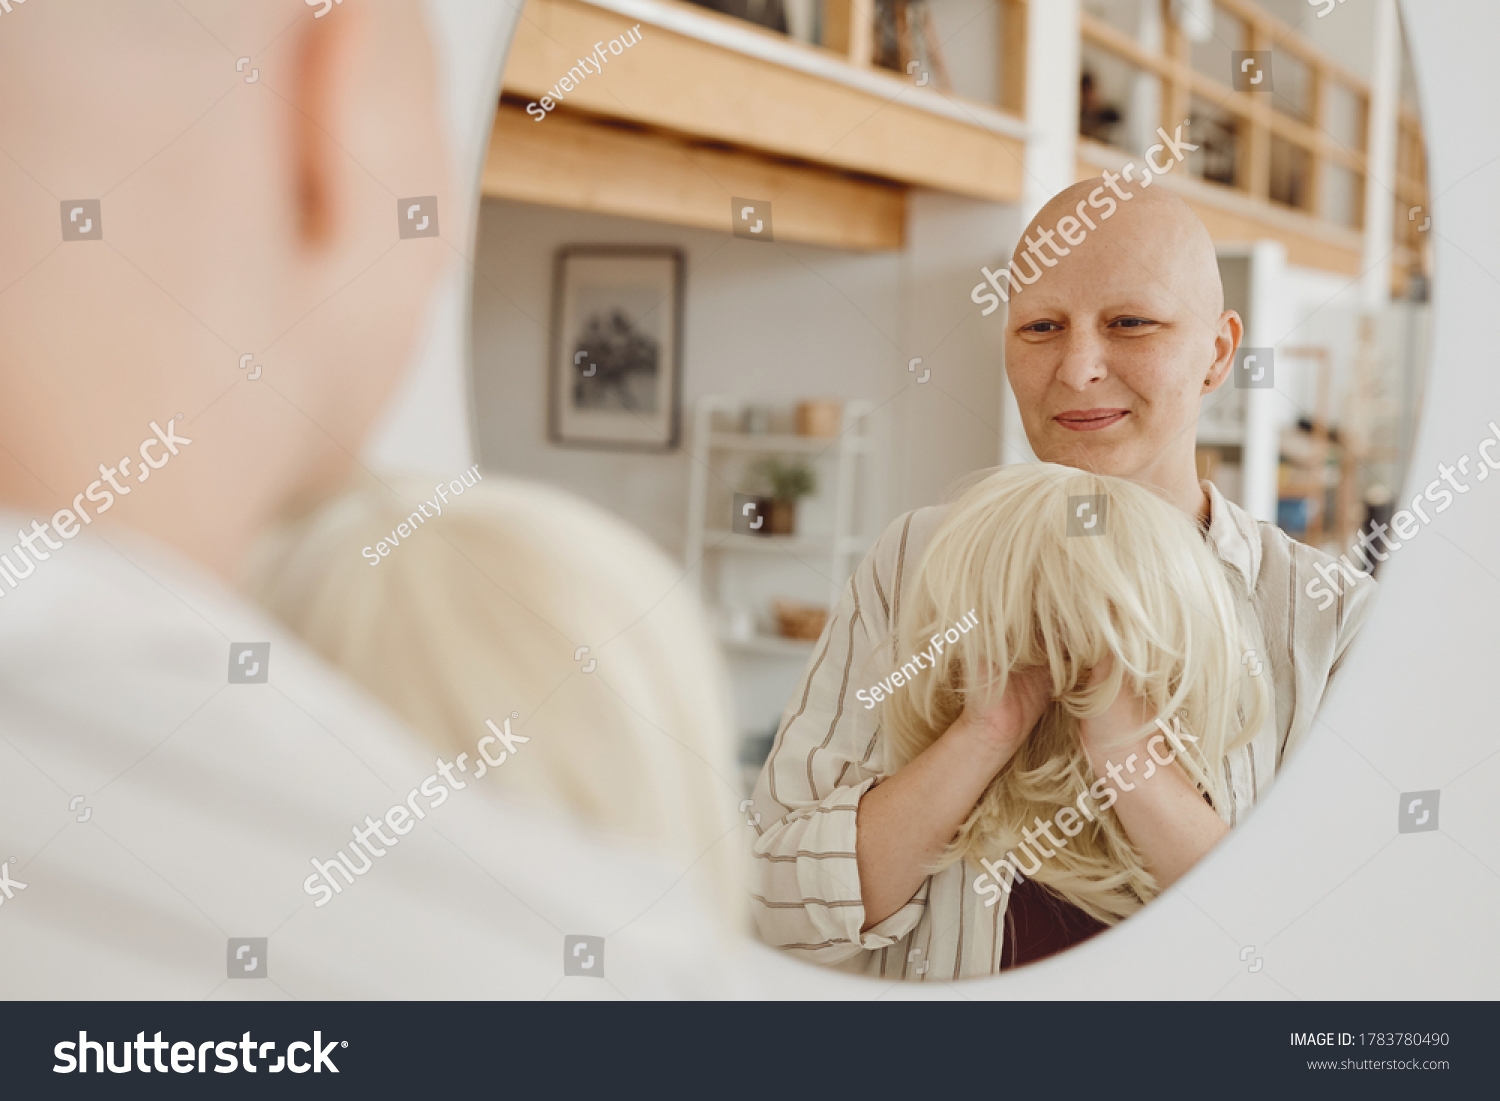 Reflection portrait of bald adult woman looking in mirror holding wig while standing in warm-toned home interior, alopecia and cancer awareness, copy space #1783780490